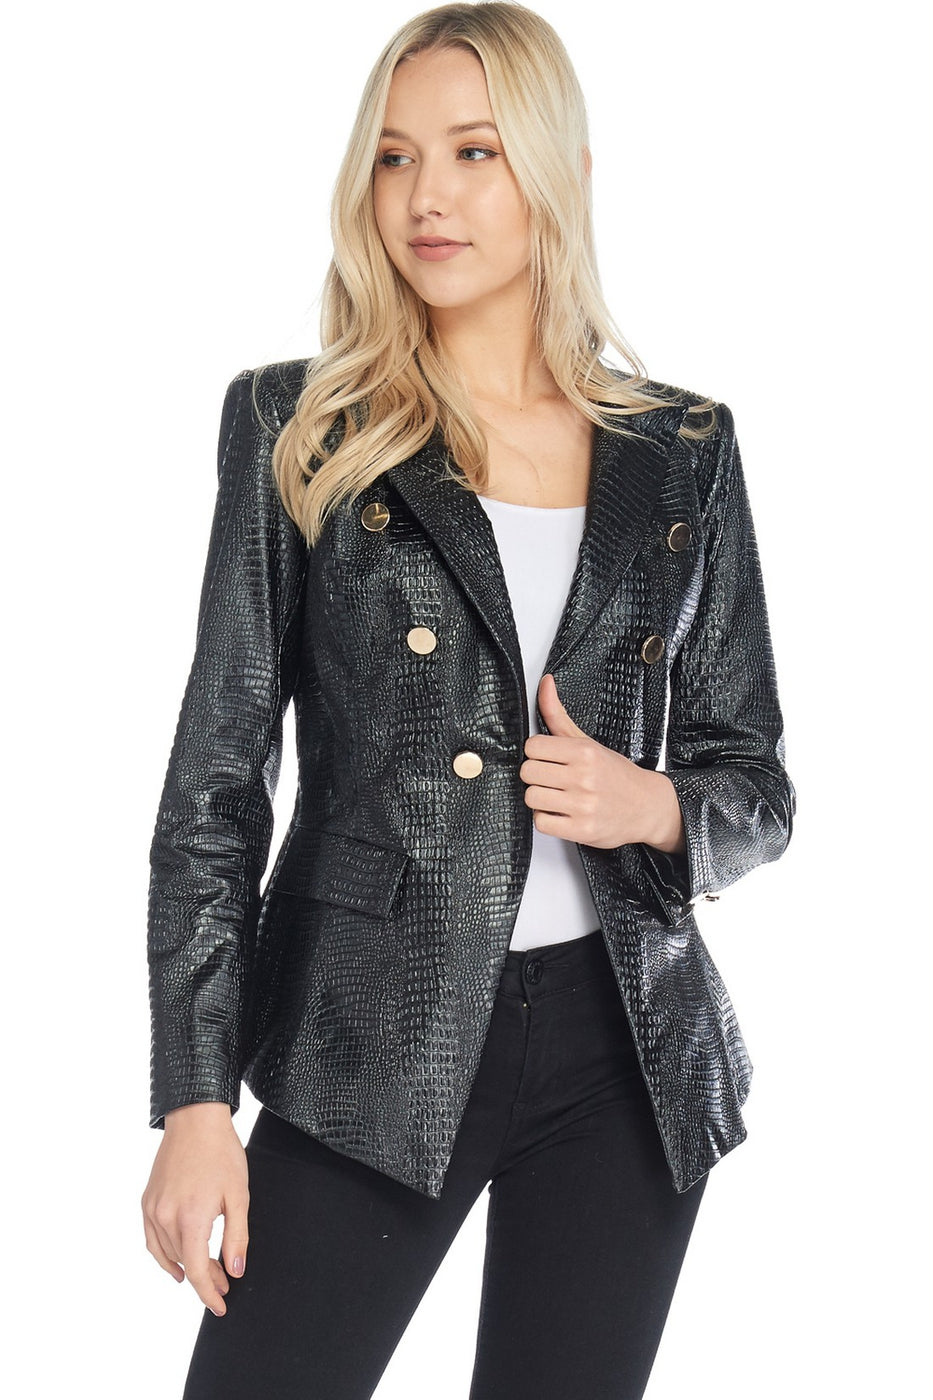 Faux Leather Blazer With Buttons